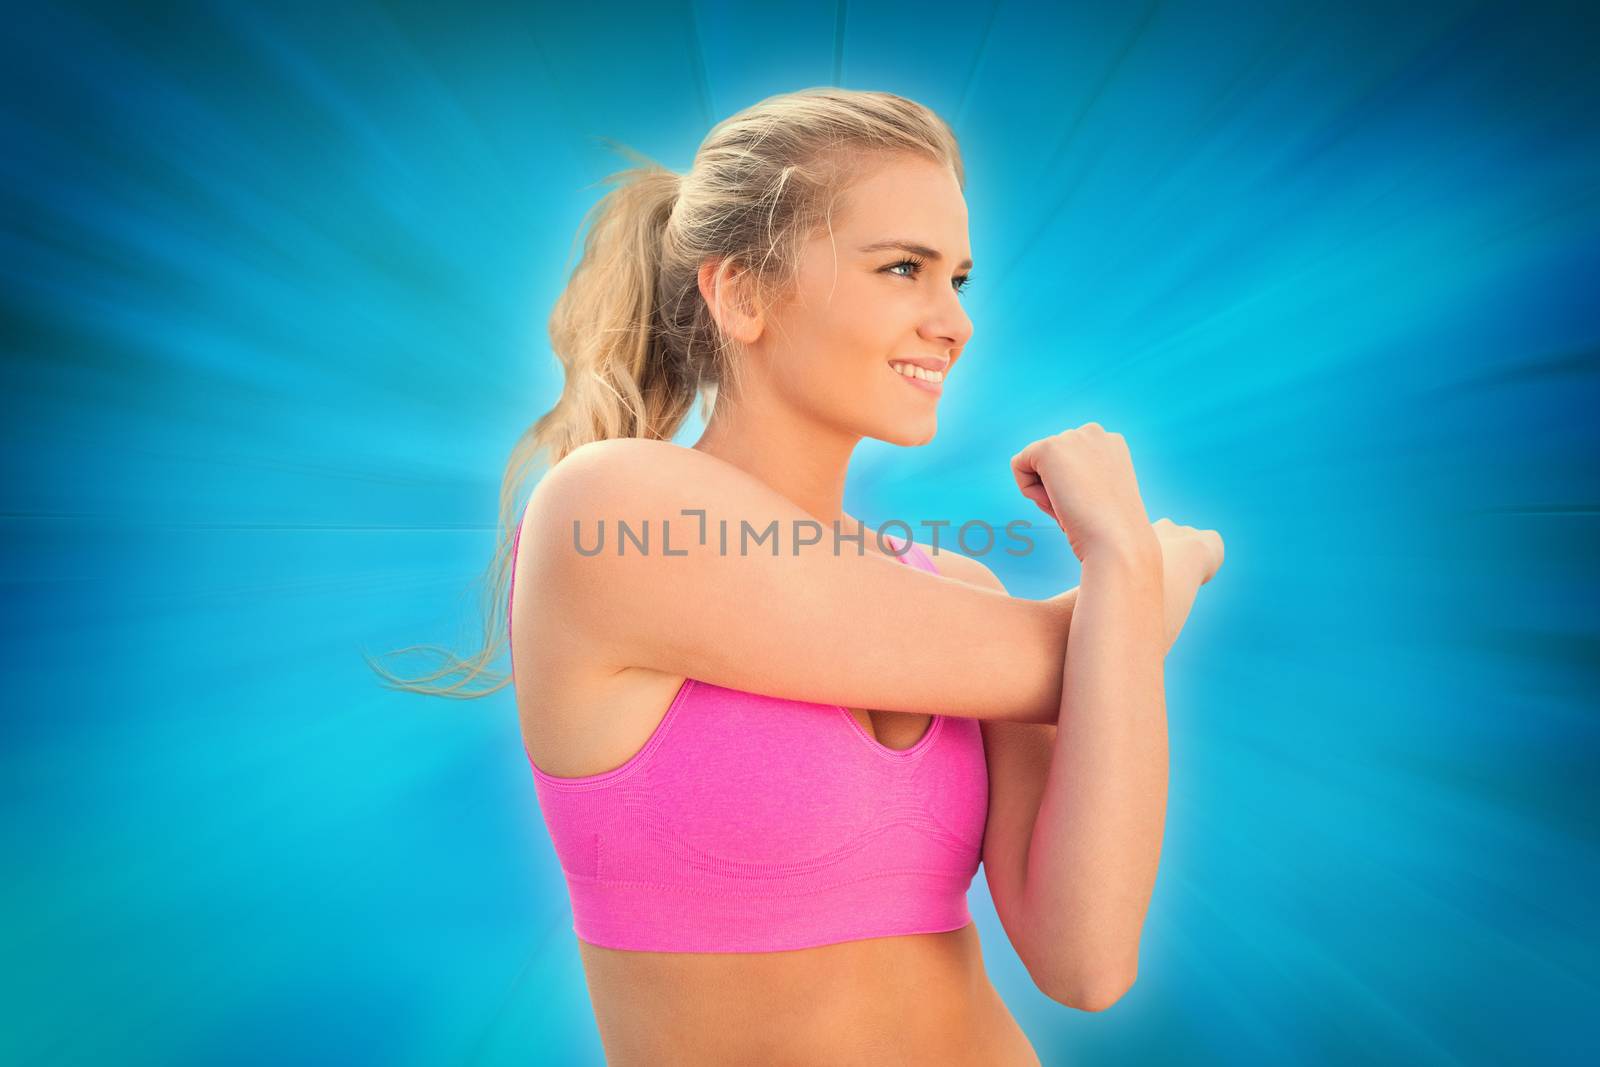 Smiling toned woman exercising on beach against abstract background